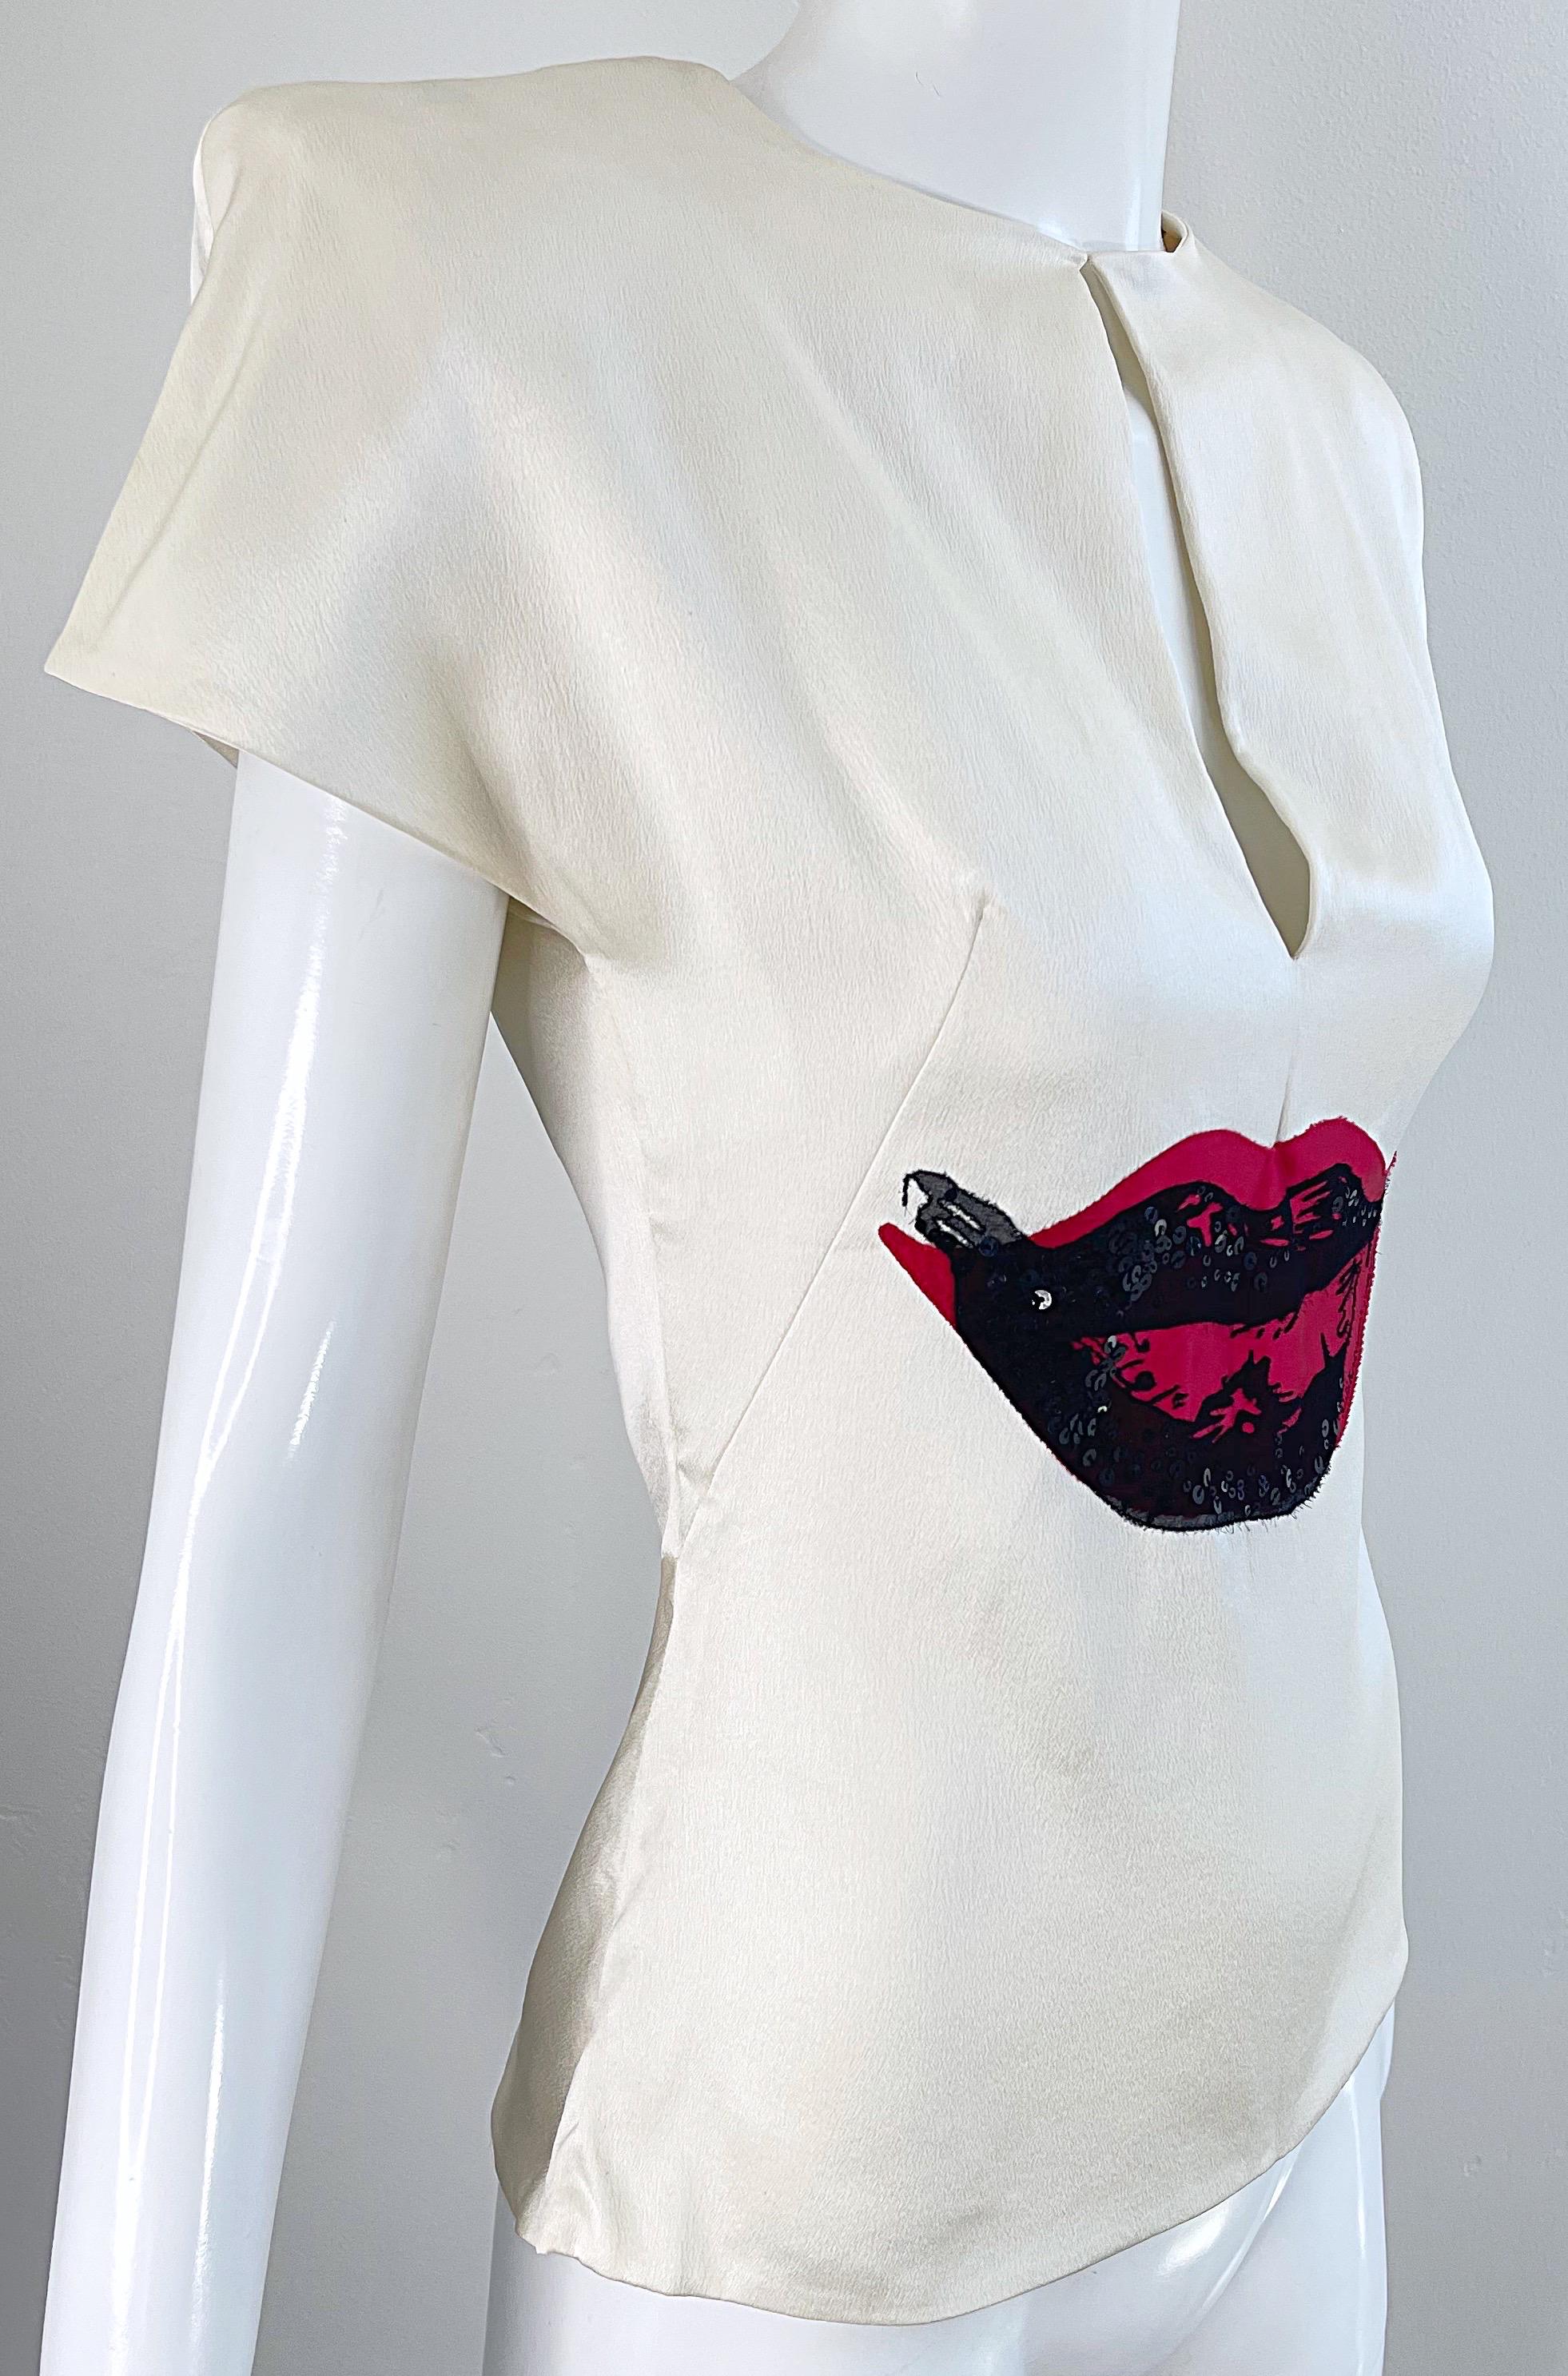 Alexander McQueen 2009 Size 38 / 2 Ivory Silk Red Lips Sequin Blouse Top Shirt For Sale 6